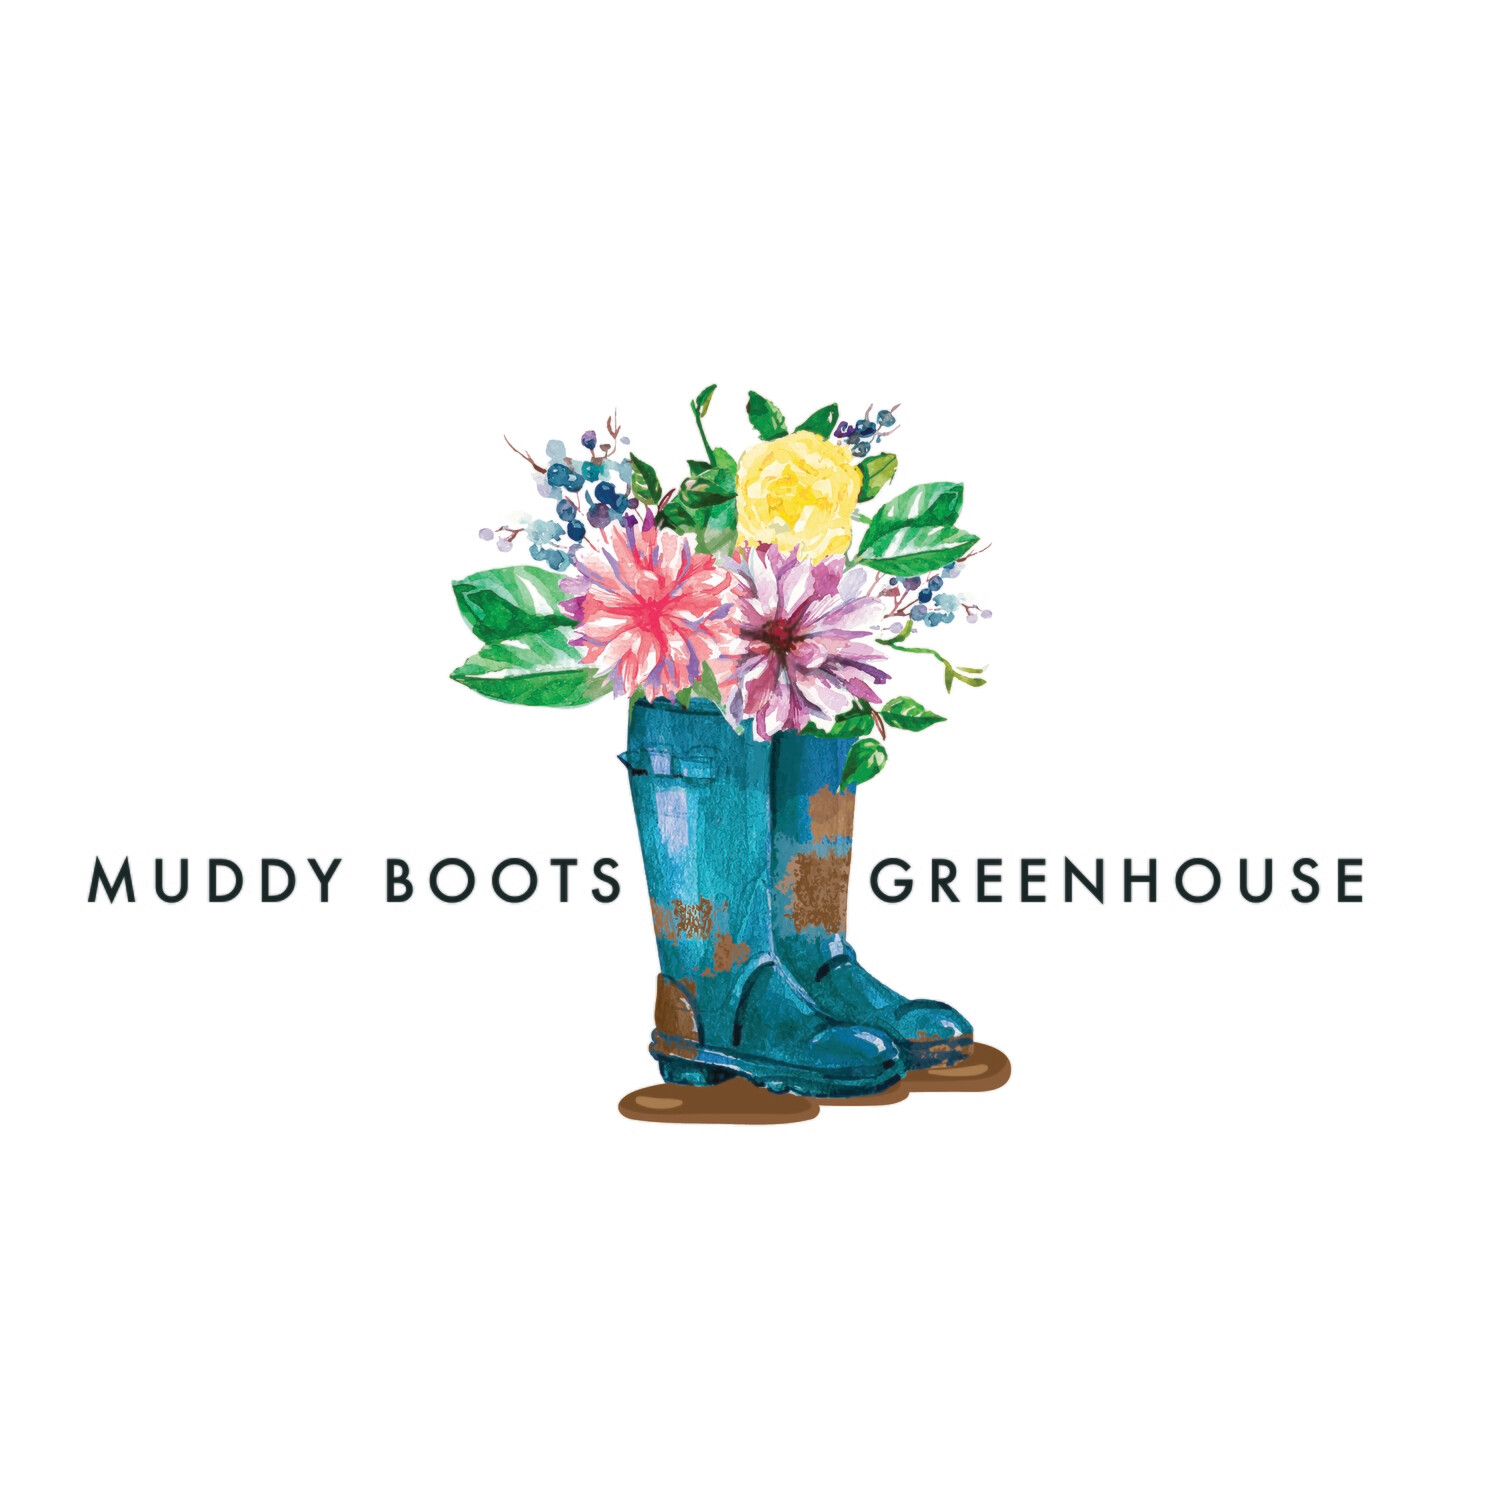 Gift card - Muddy Boots Greenhouse & 
Corey & Co. Landscaping Llc.